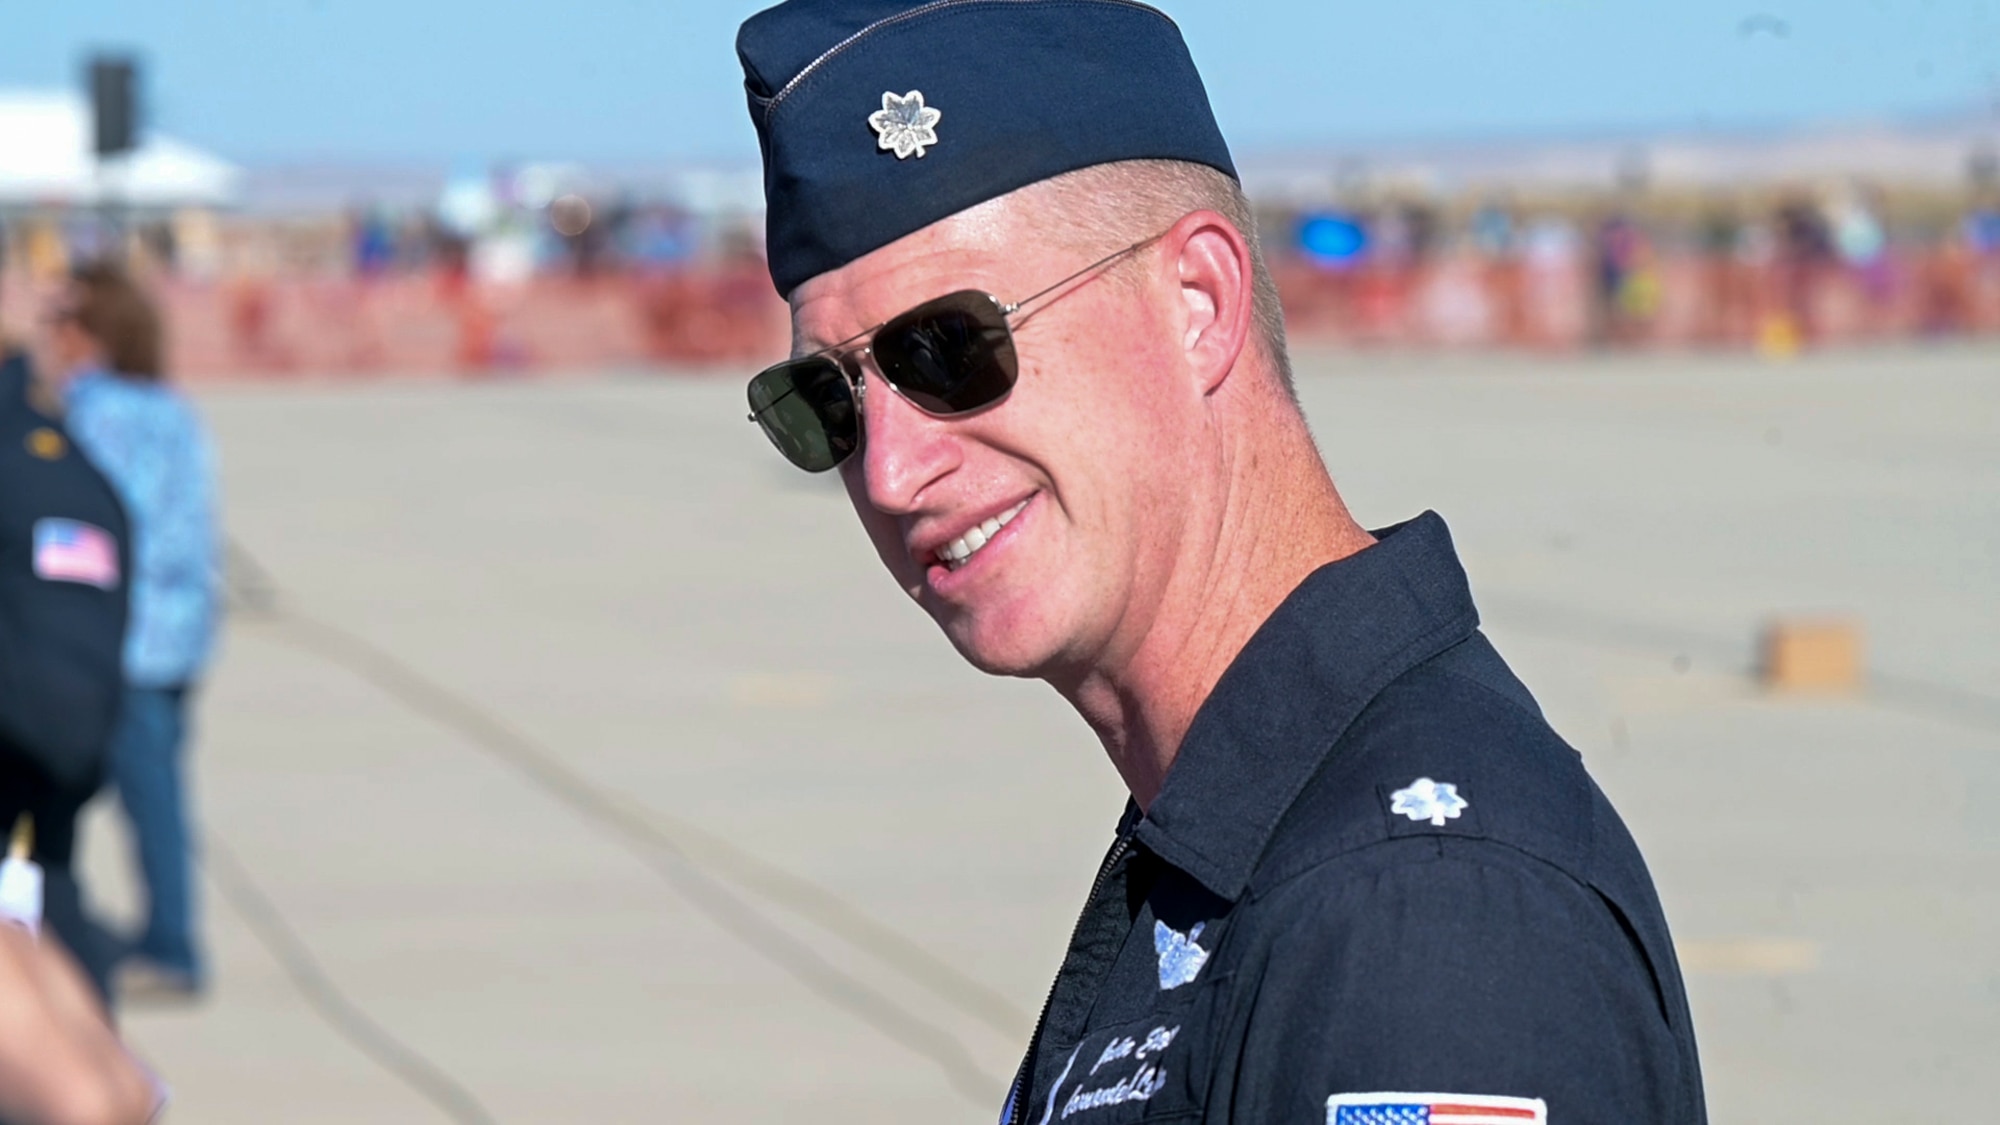 Lt. Col. Justin "Astro" Elliott, USAF Thunderbirds Commander, signs autographs during the 2022 Aerospace Valley Air Show at Edwards Air Force Base. (U.S. Air Force photo by Adam Bowles)